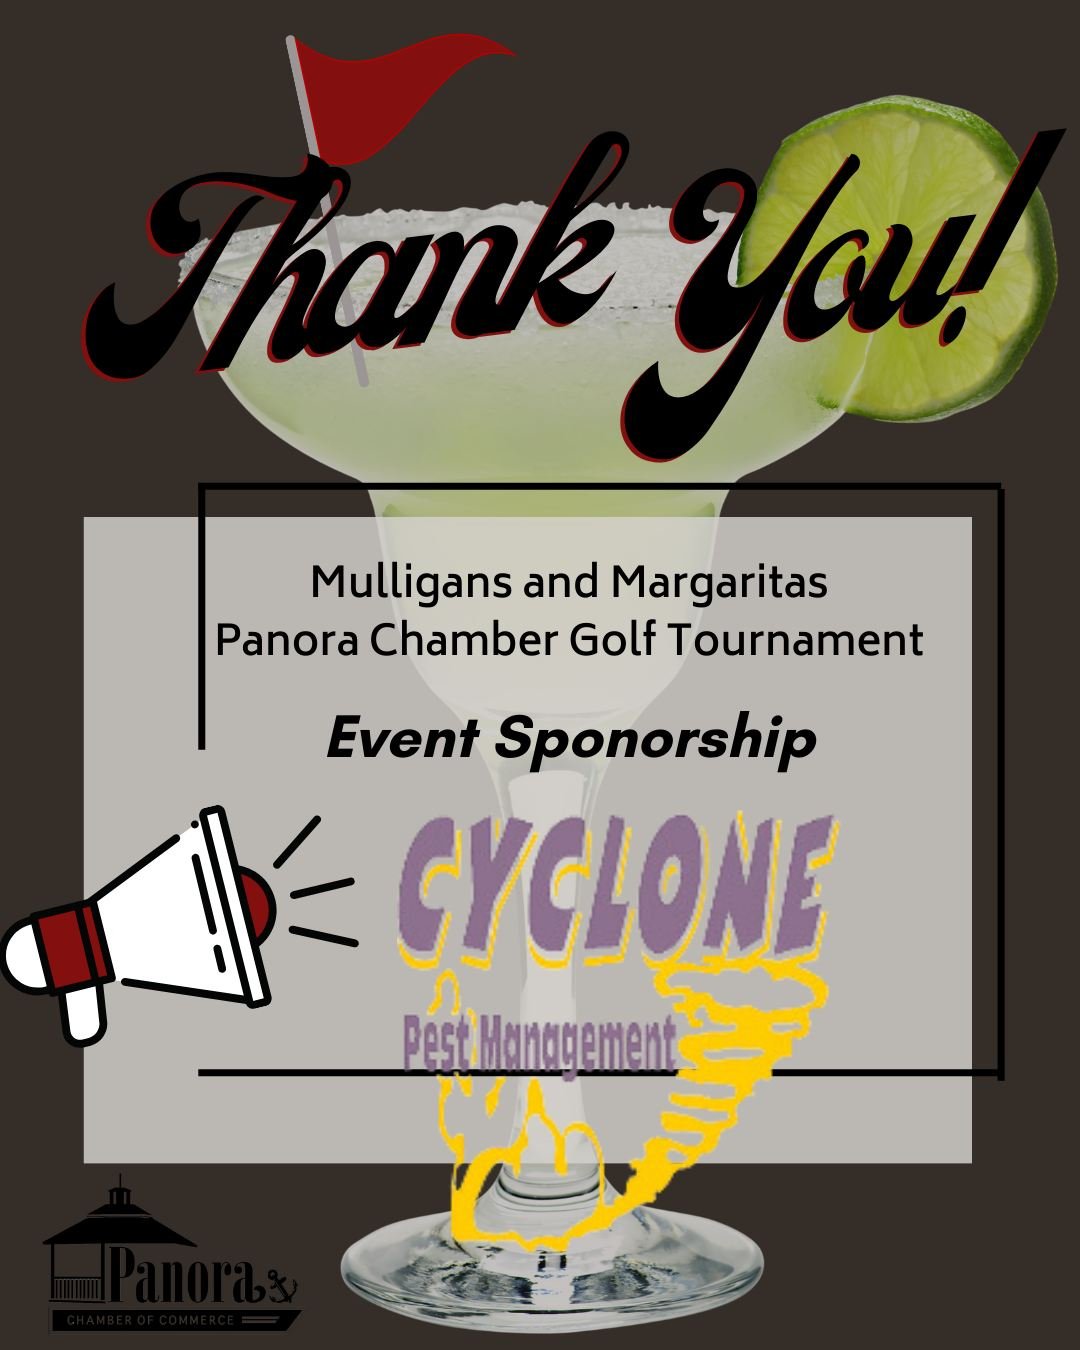 🌟 Event Sponsor Shout-out 🌟 

Cyclone Pest Control is teeing up to support to the Panora Chamber Golf Tournament through our event sponsorship level. 

This sponsorship opportunity allows us to give back to the community that has supported the Pano